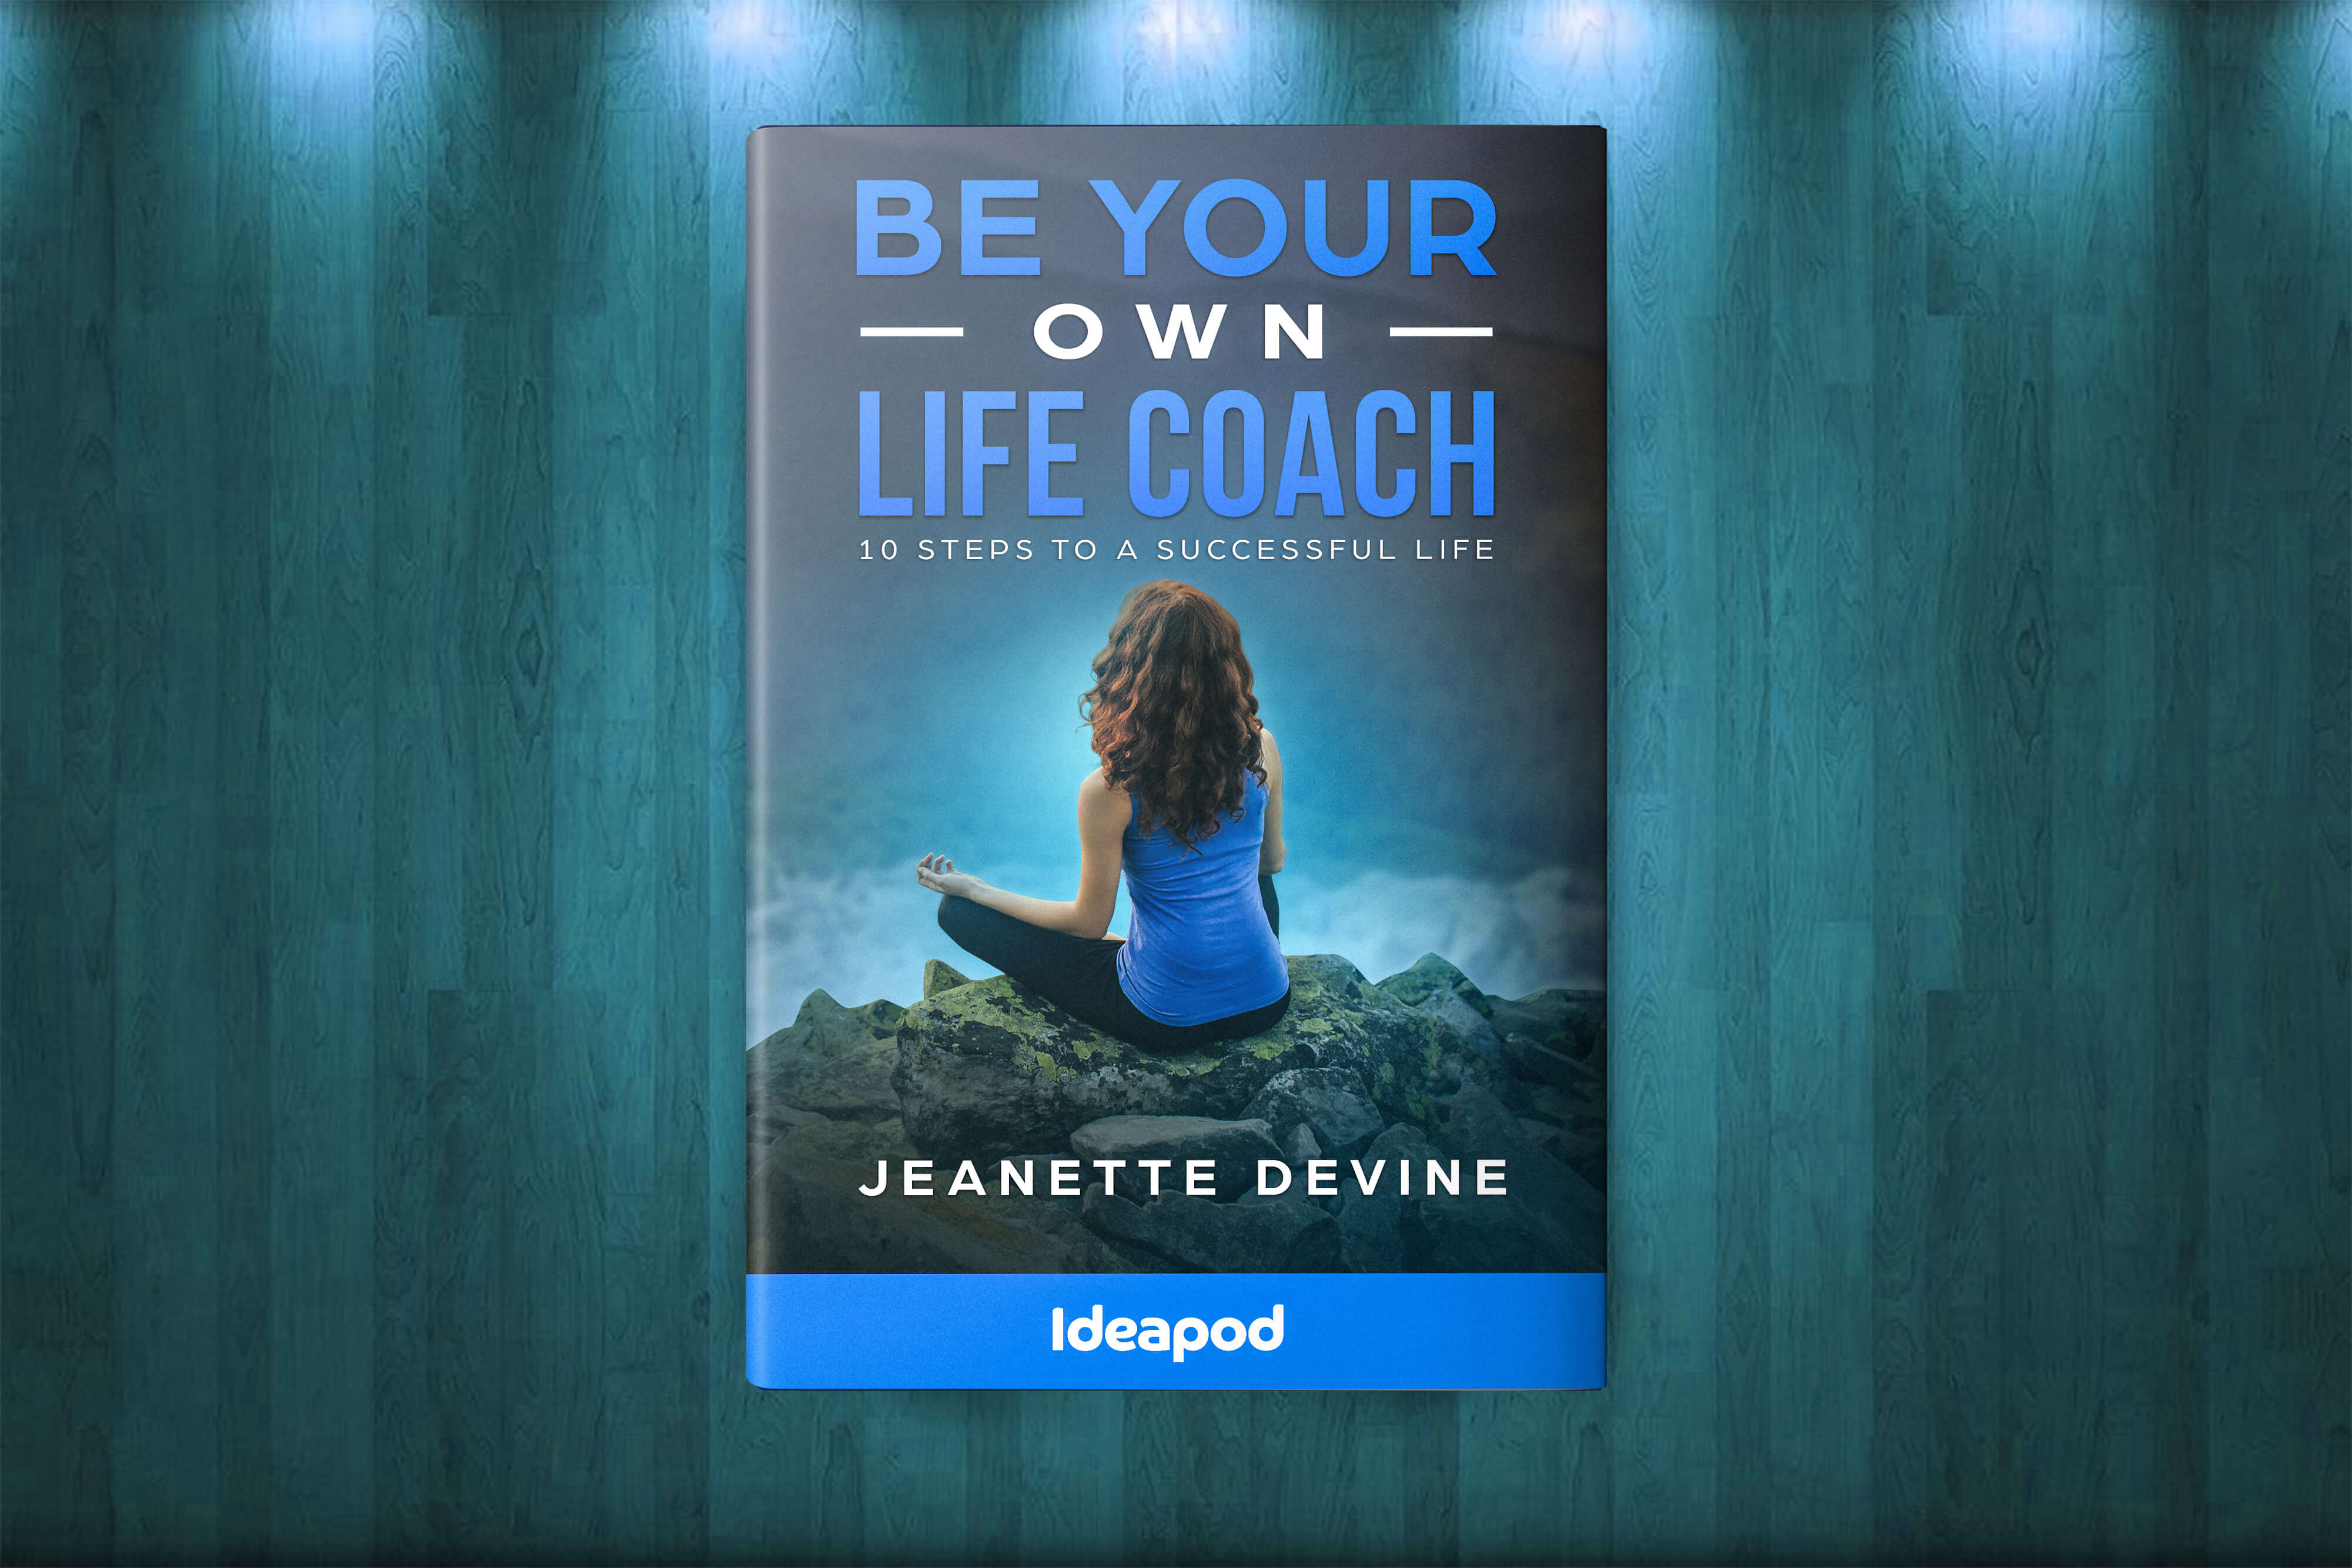 Devine wide ebook min Experience the Remarkable Benefits of Life Coaching Without the Price Tag